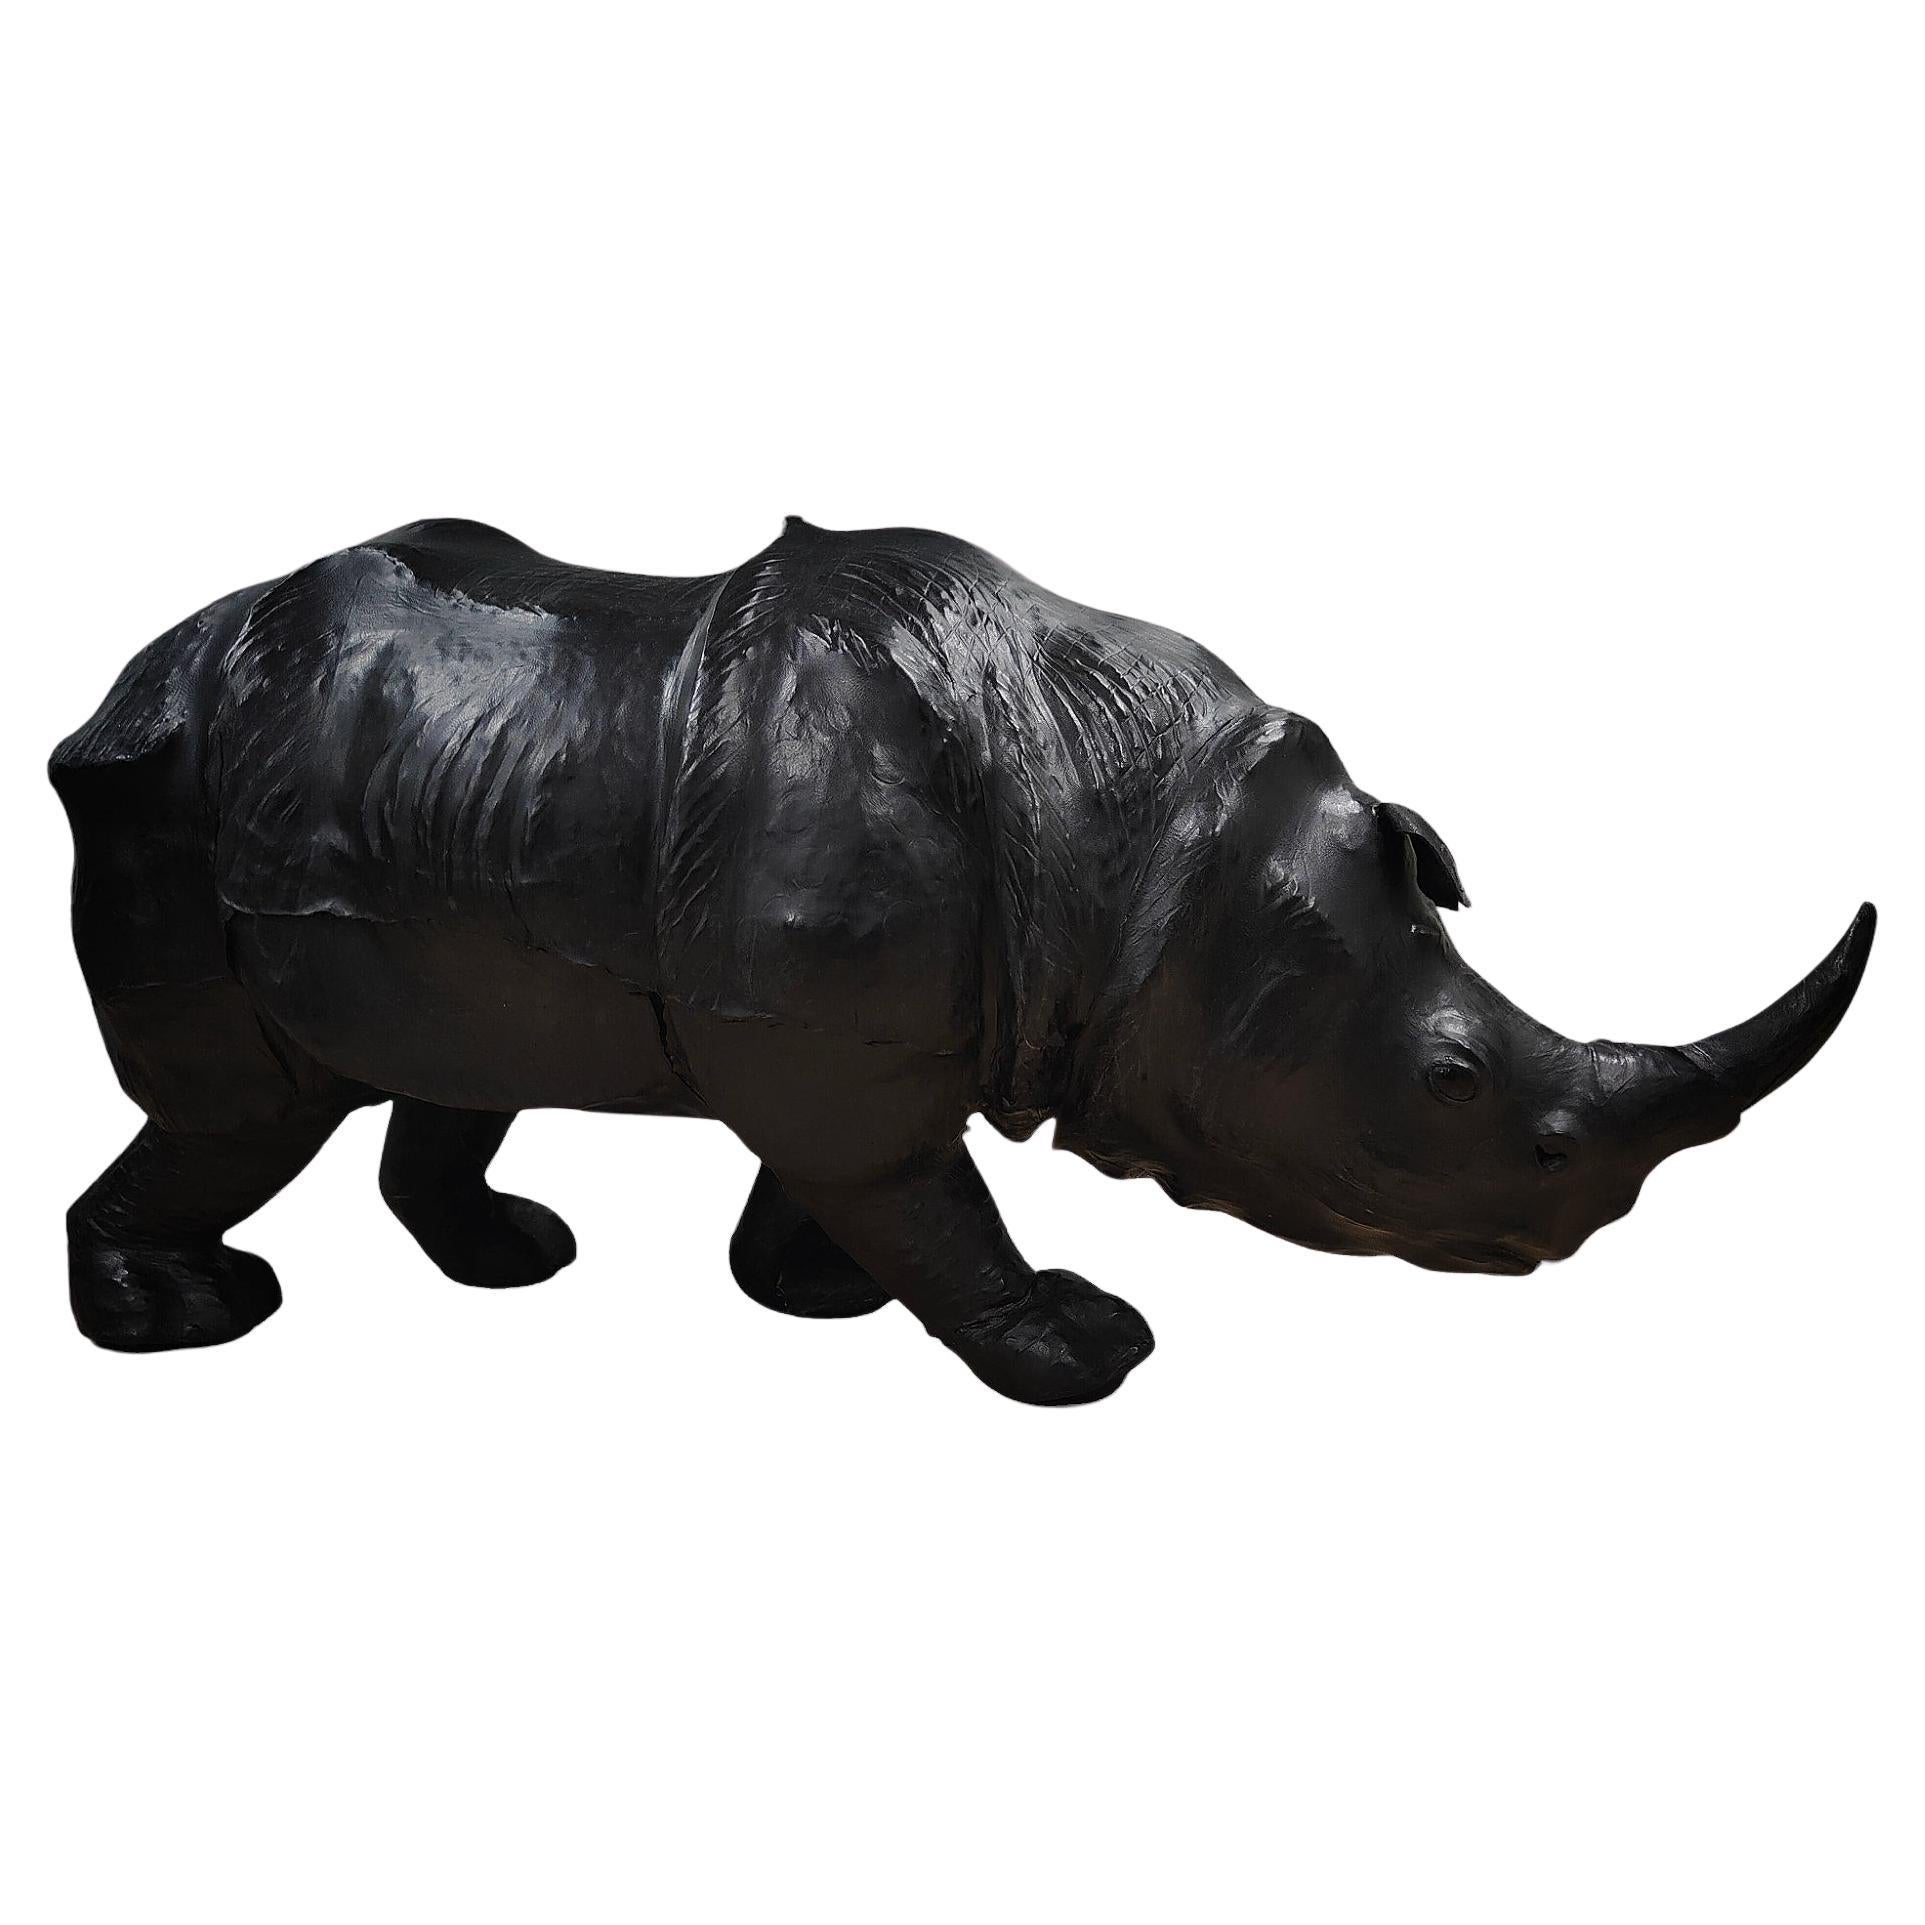 Large 1950s Leather Rhinoceros - European Quality Decorative Piece with Exquisit For Sale